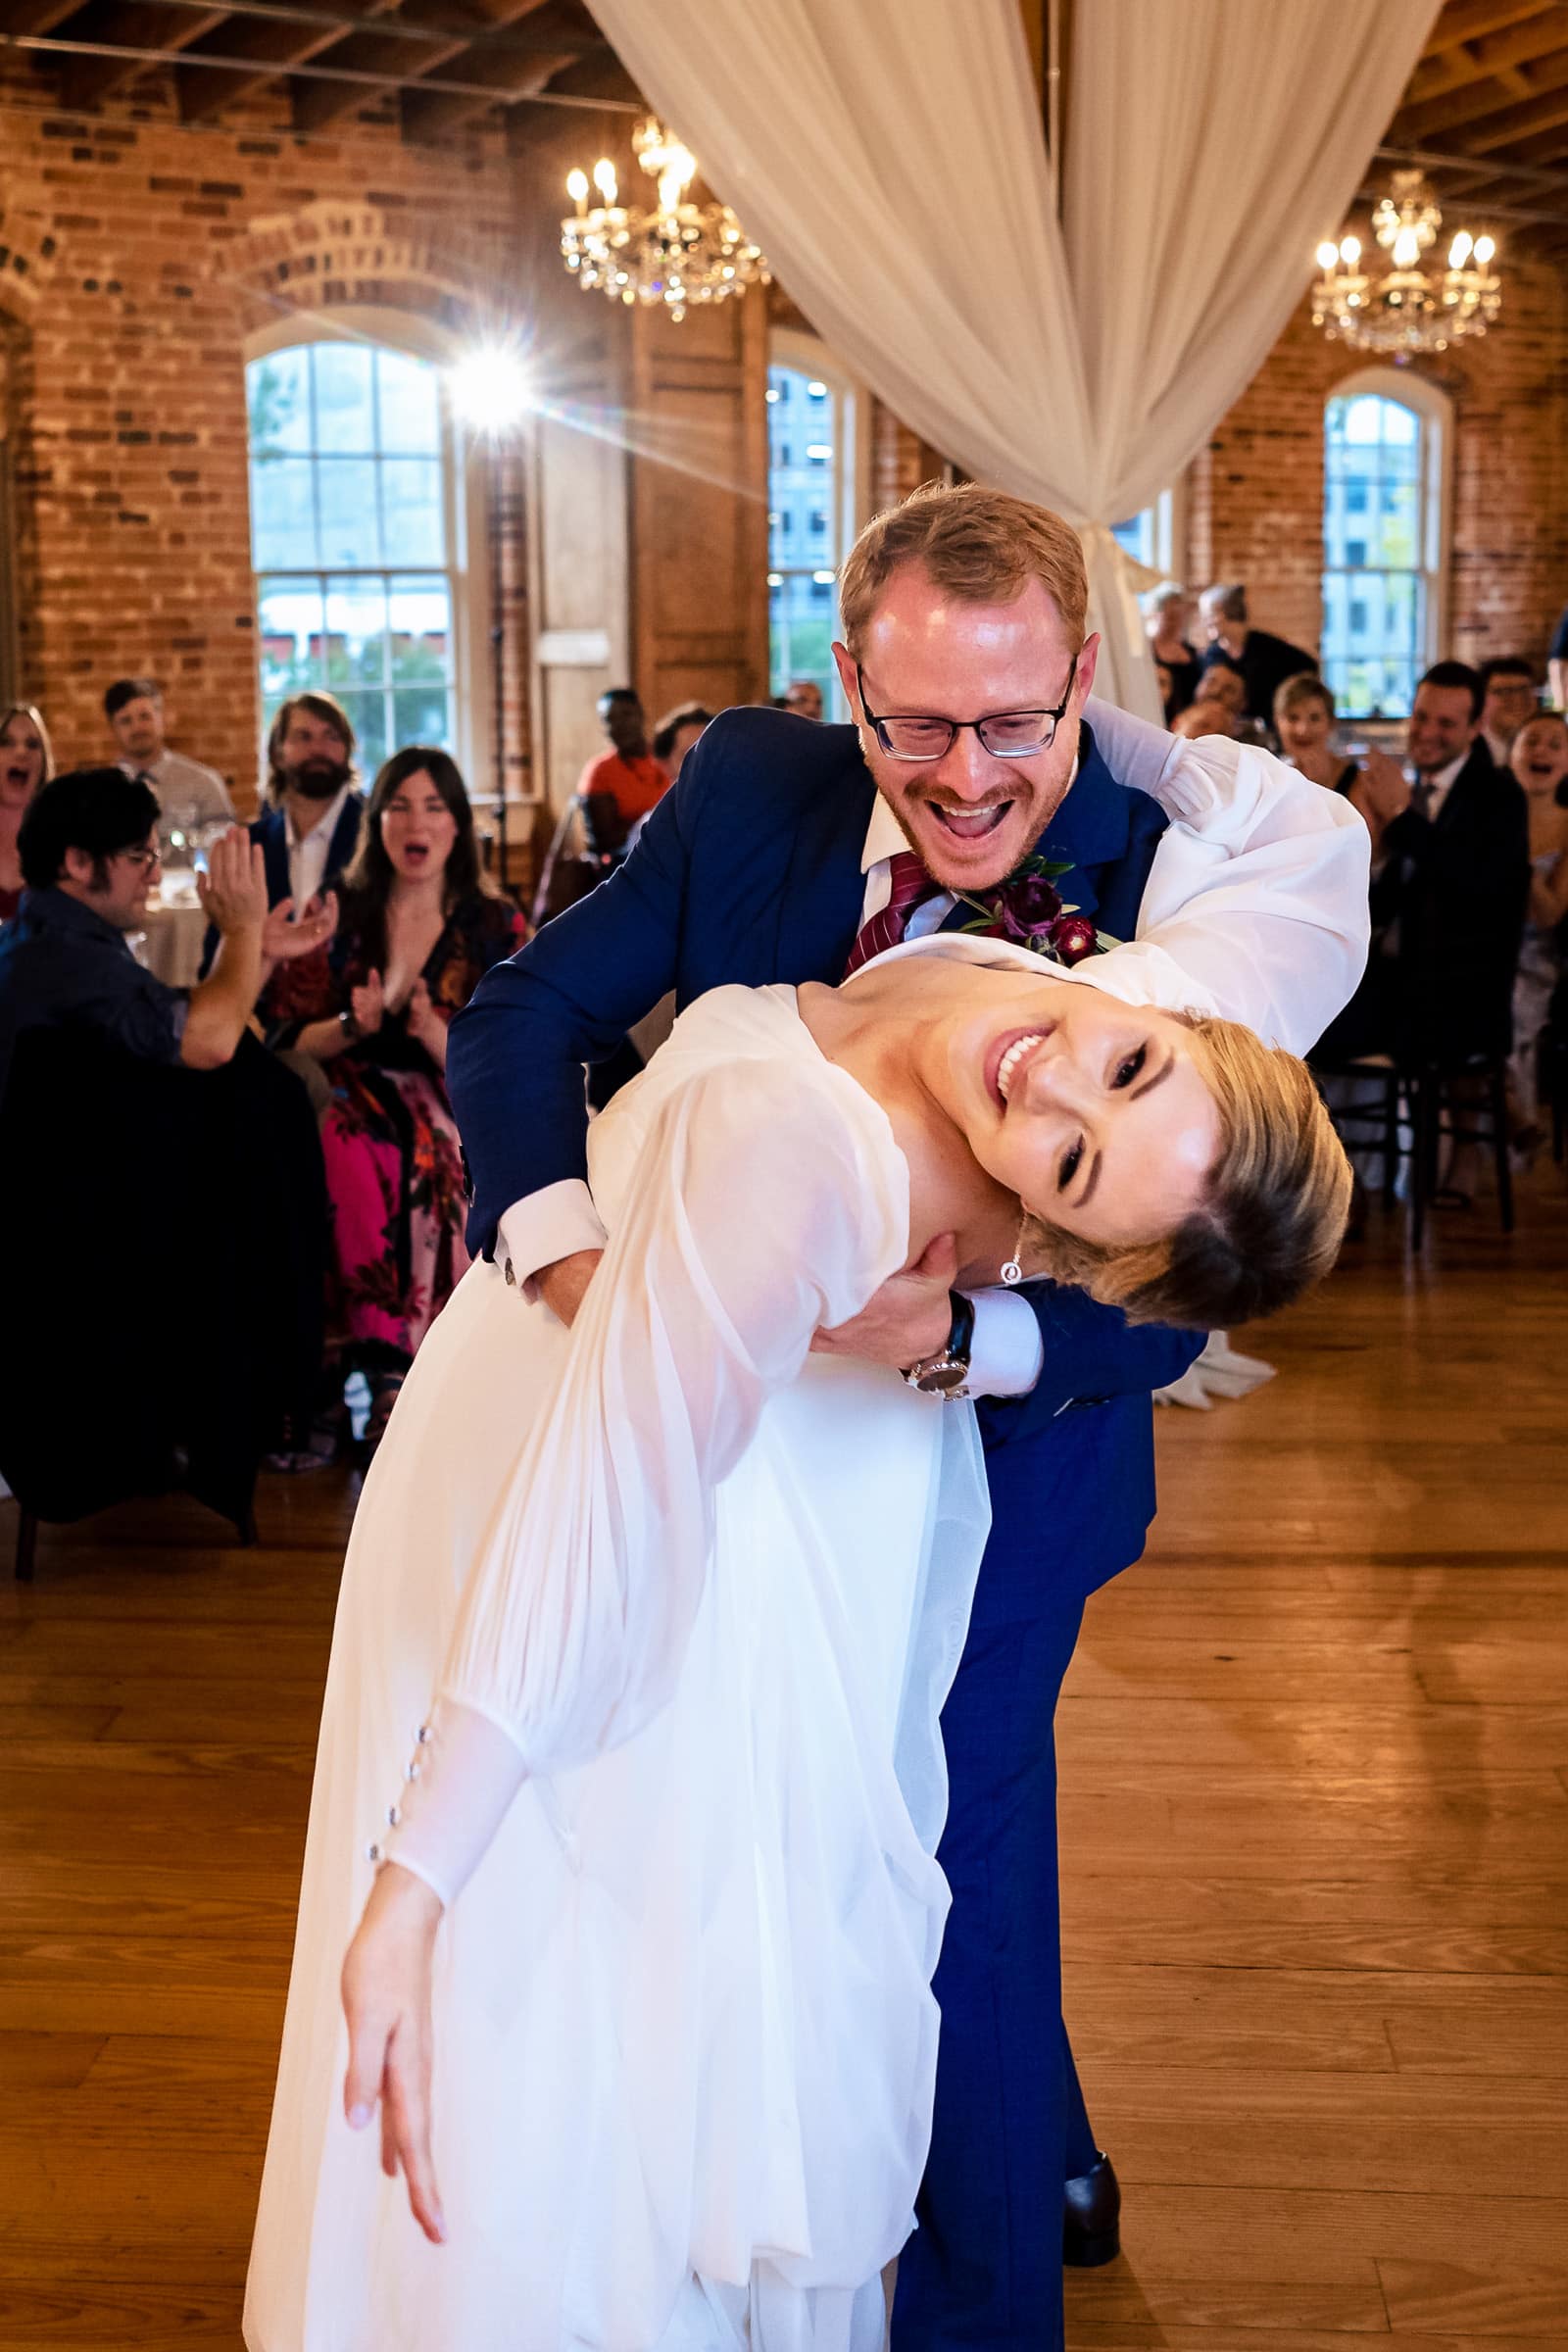 Couple's first dance at Melrose Knitting Mill in Raleigh, NC | photos by Kivus & Camera